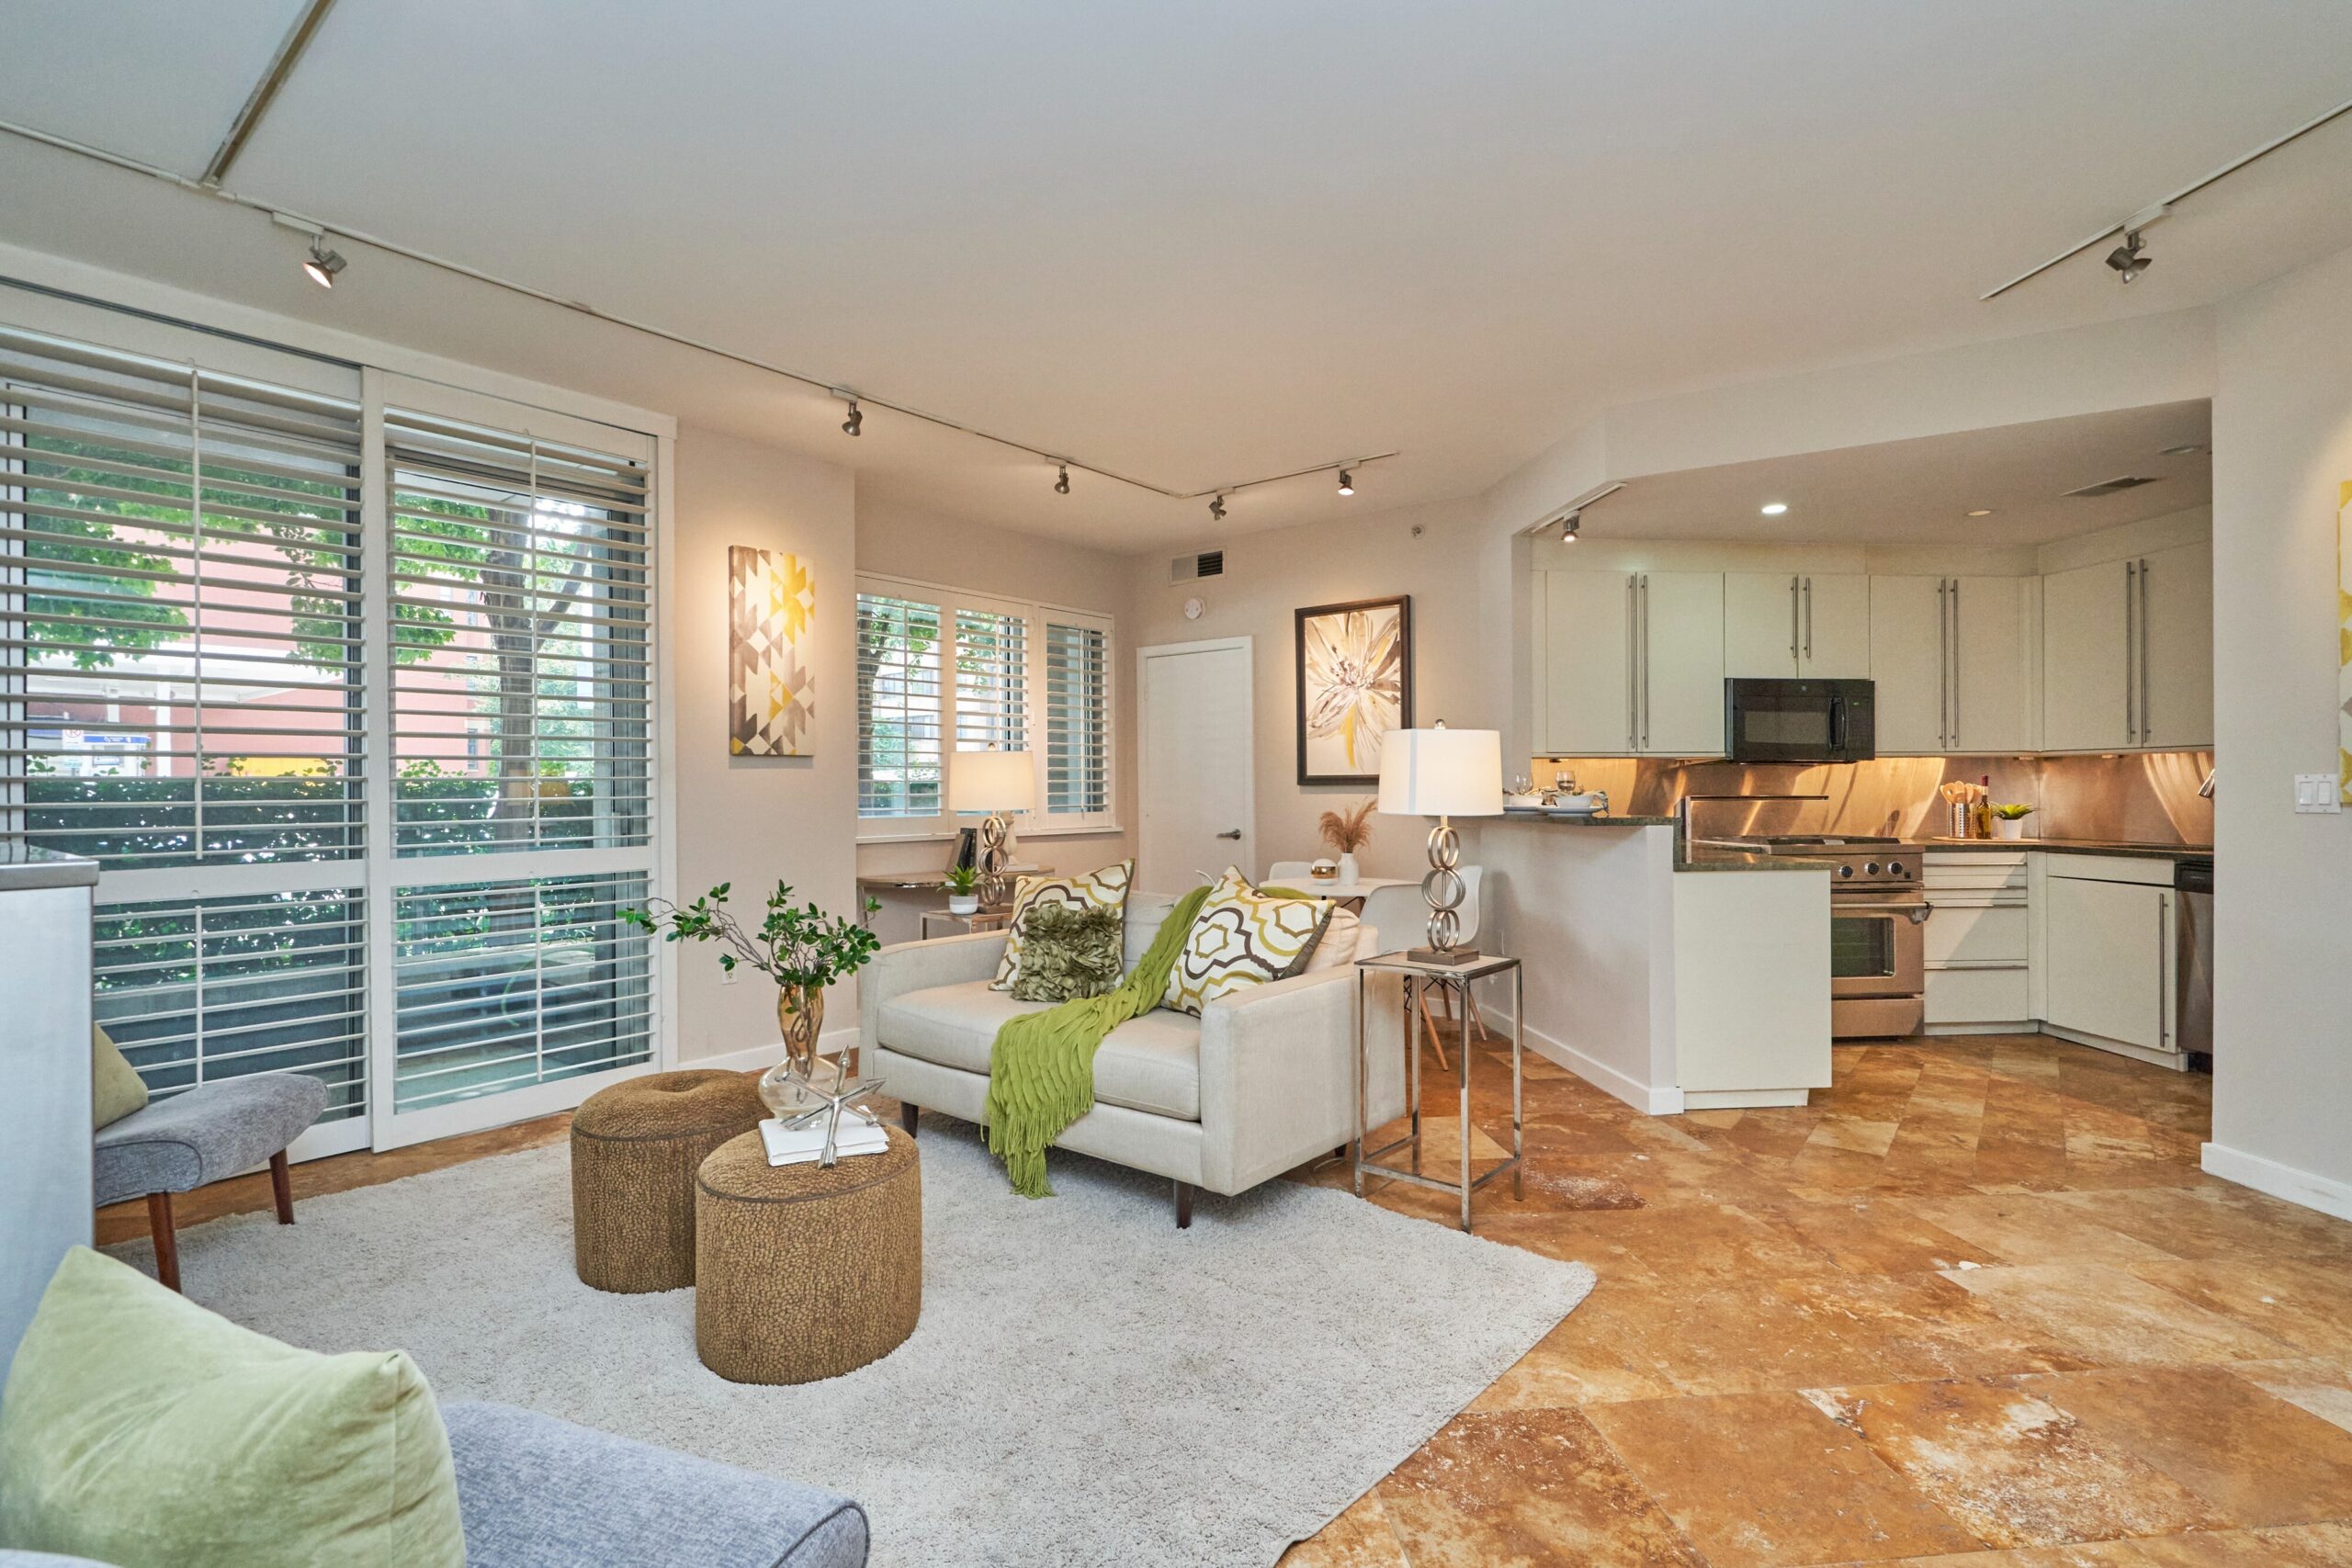 Professional interior photo of 1300 13th St NW #102, Washington DC - showing the living room view from the front entrance with marble floors and open layout